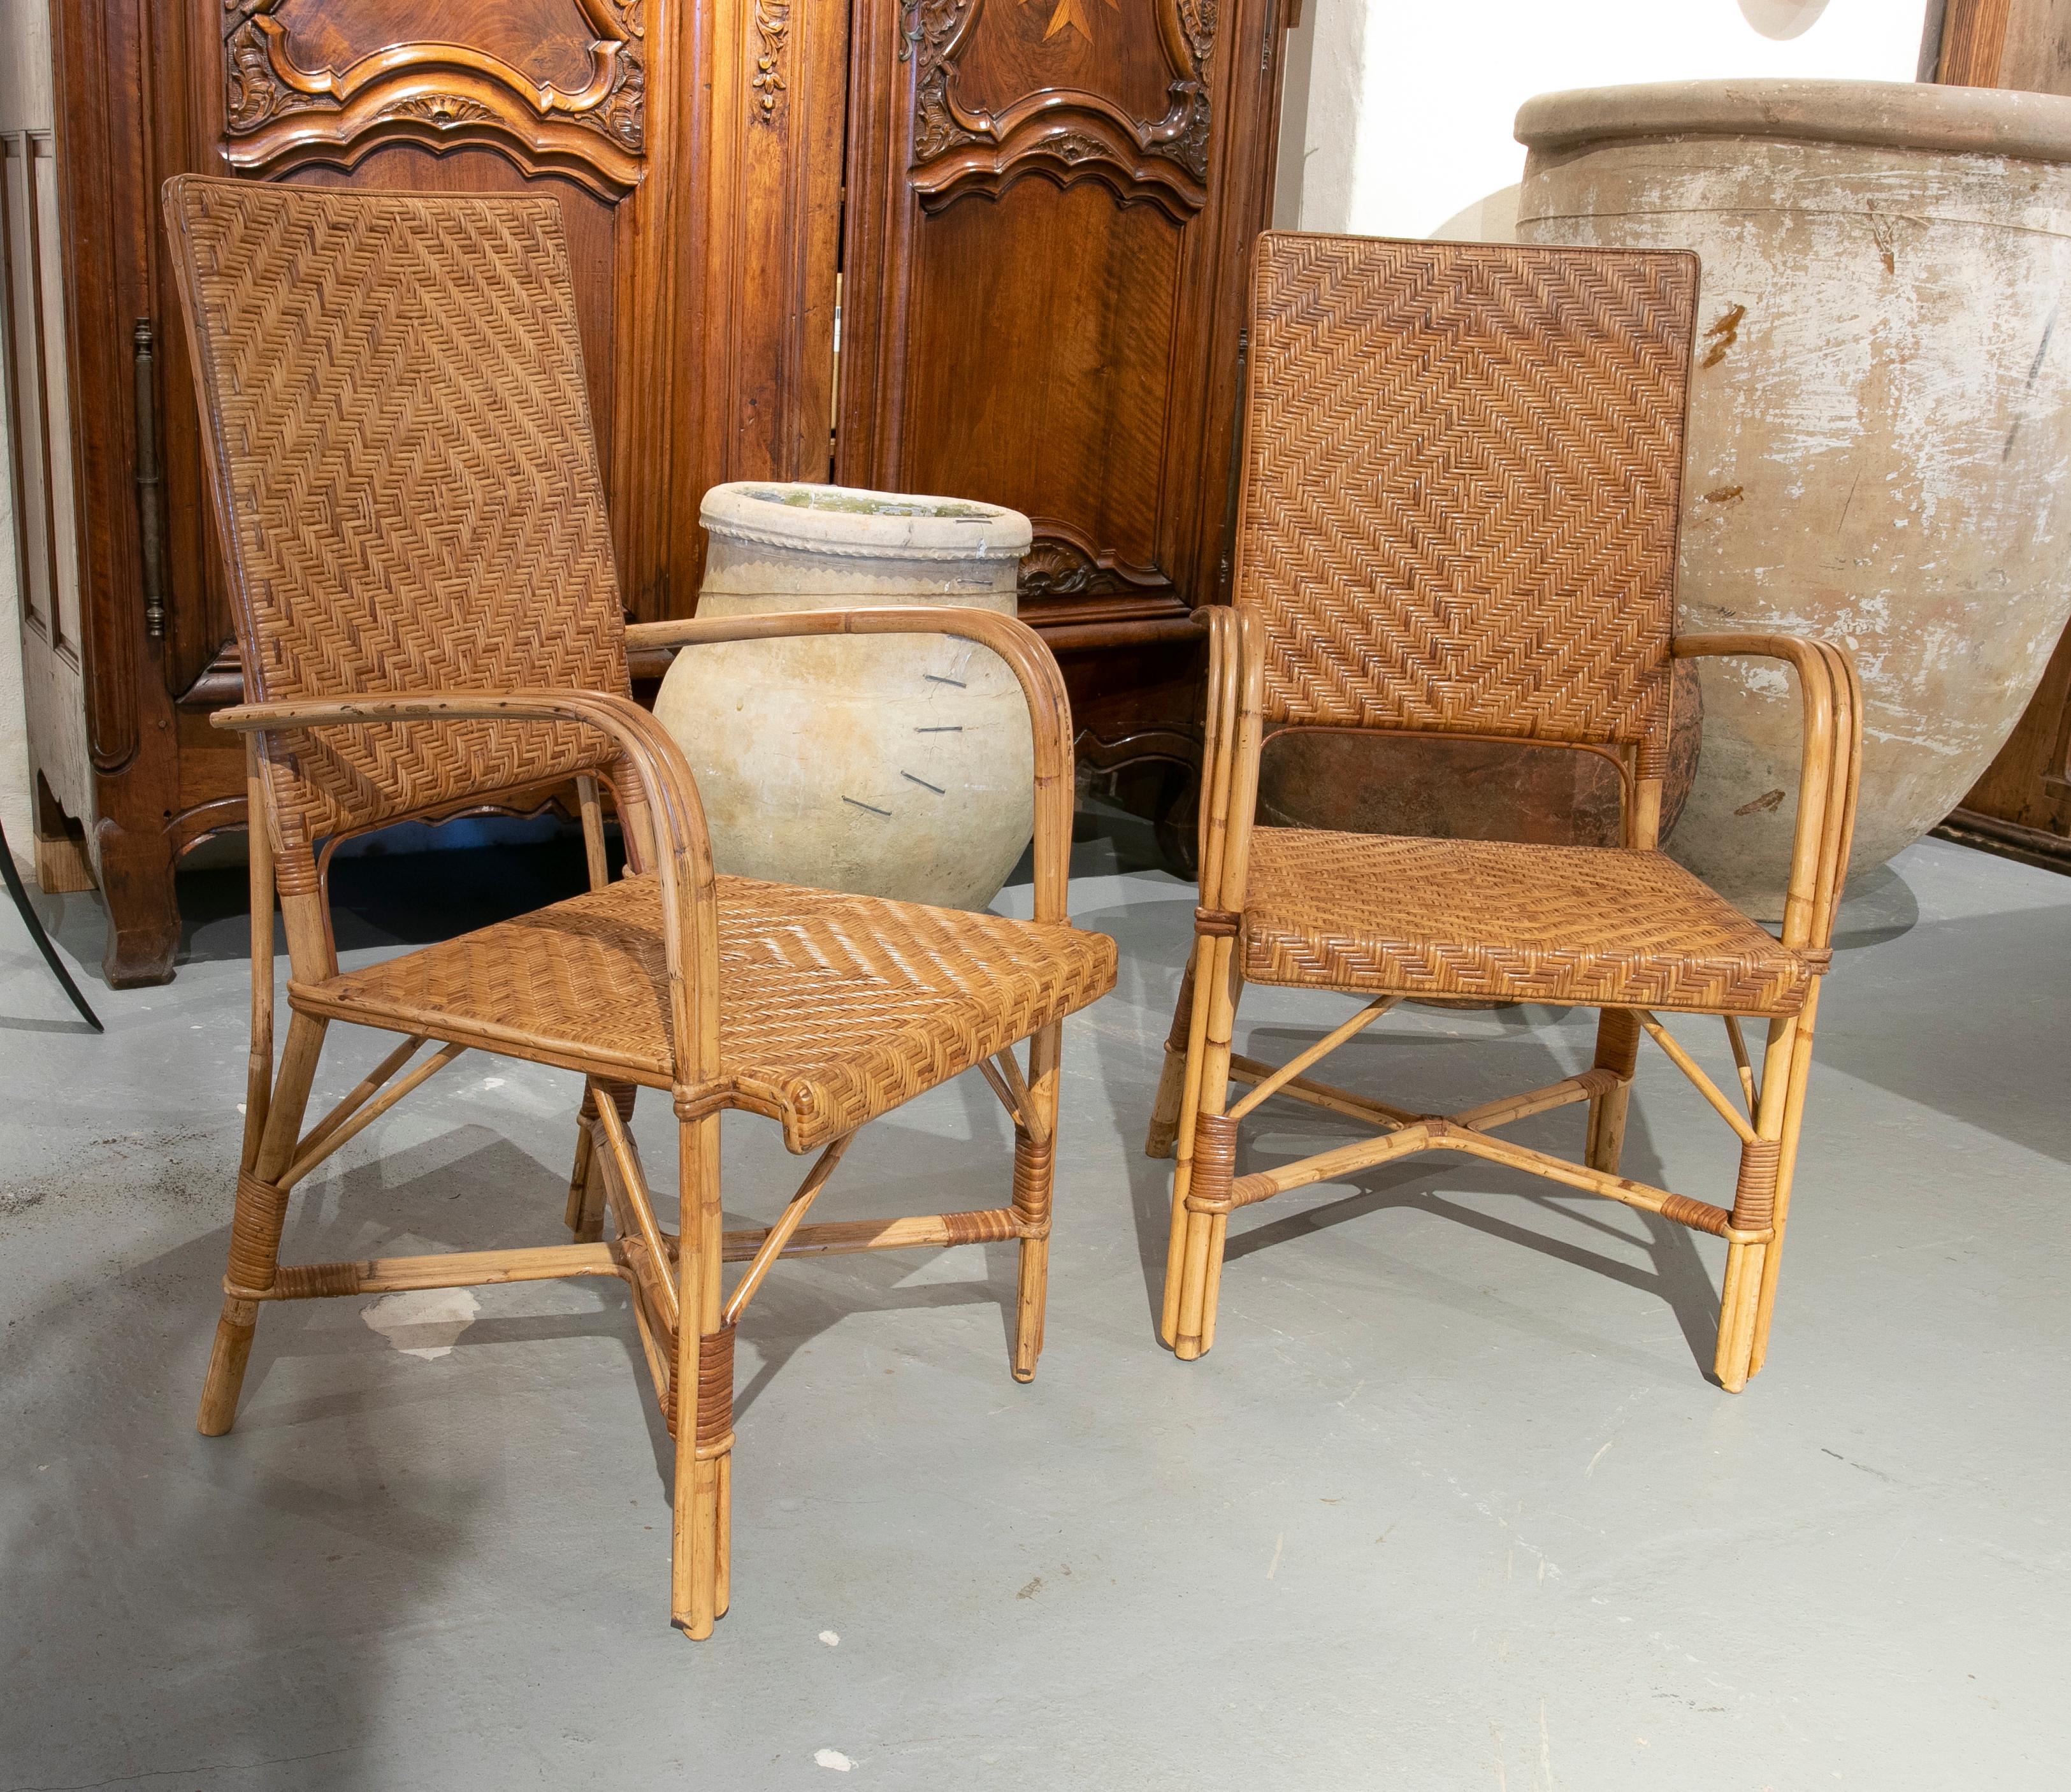 Pair of handmade spanish wicker armchairs from the 1970ies.